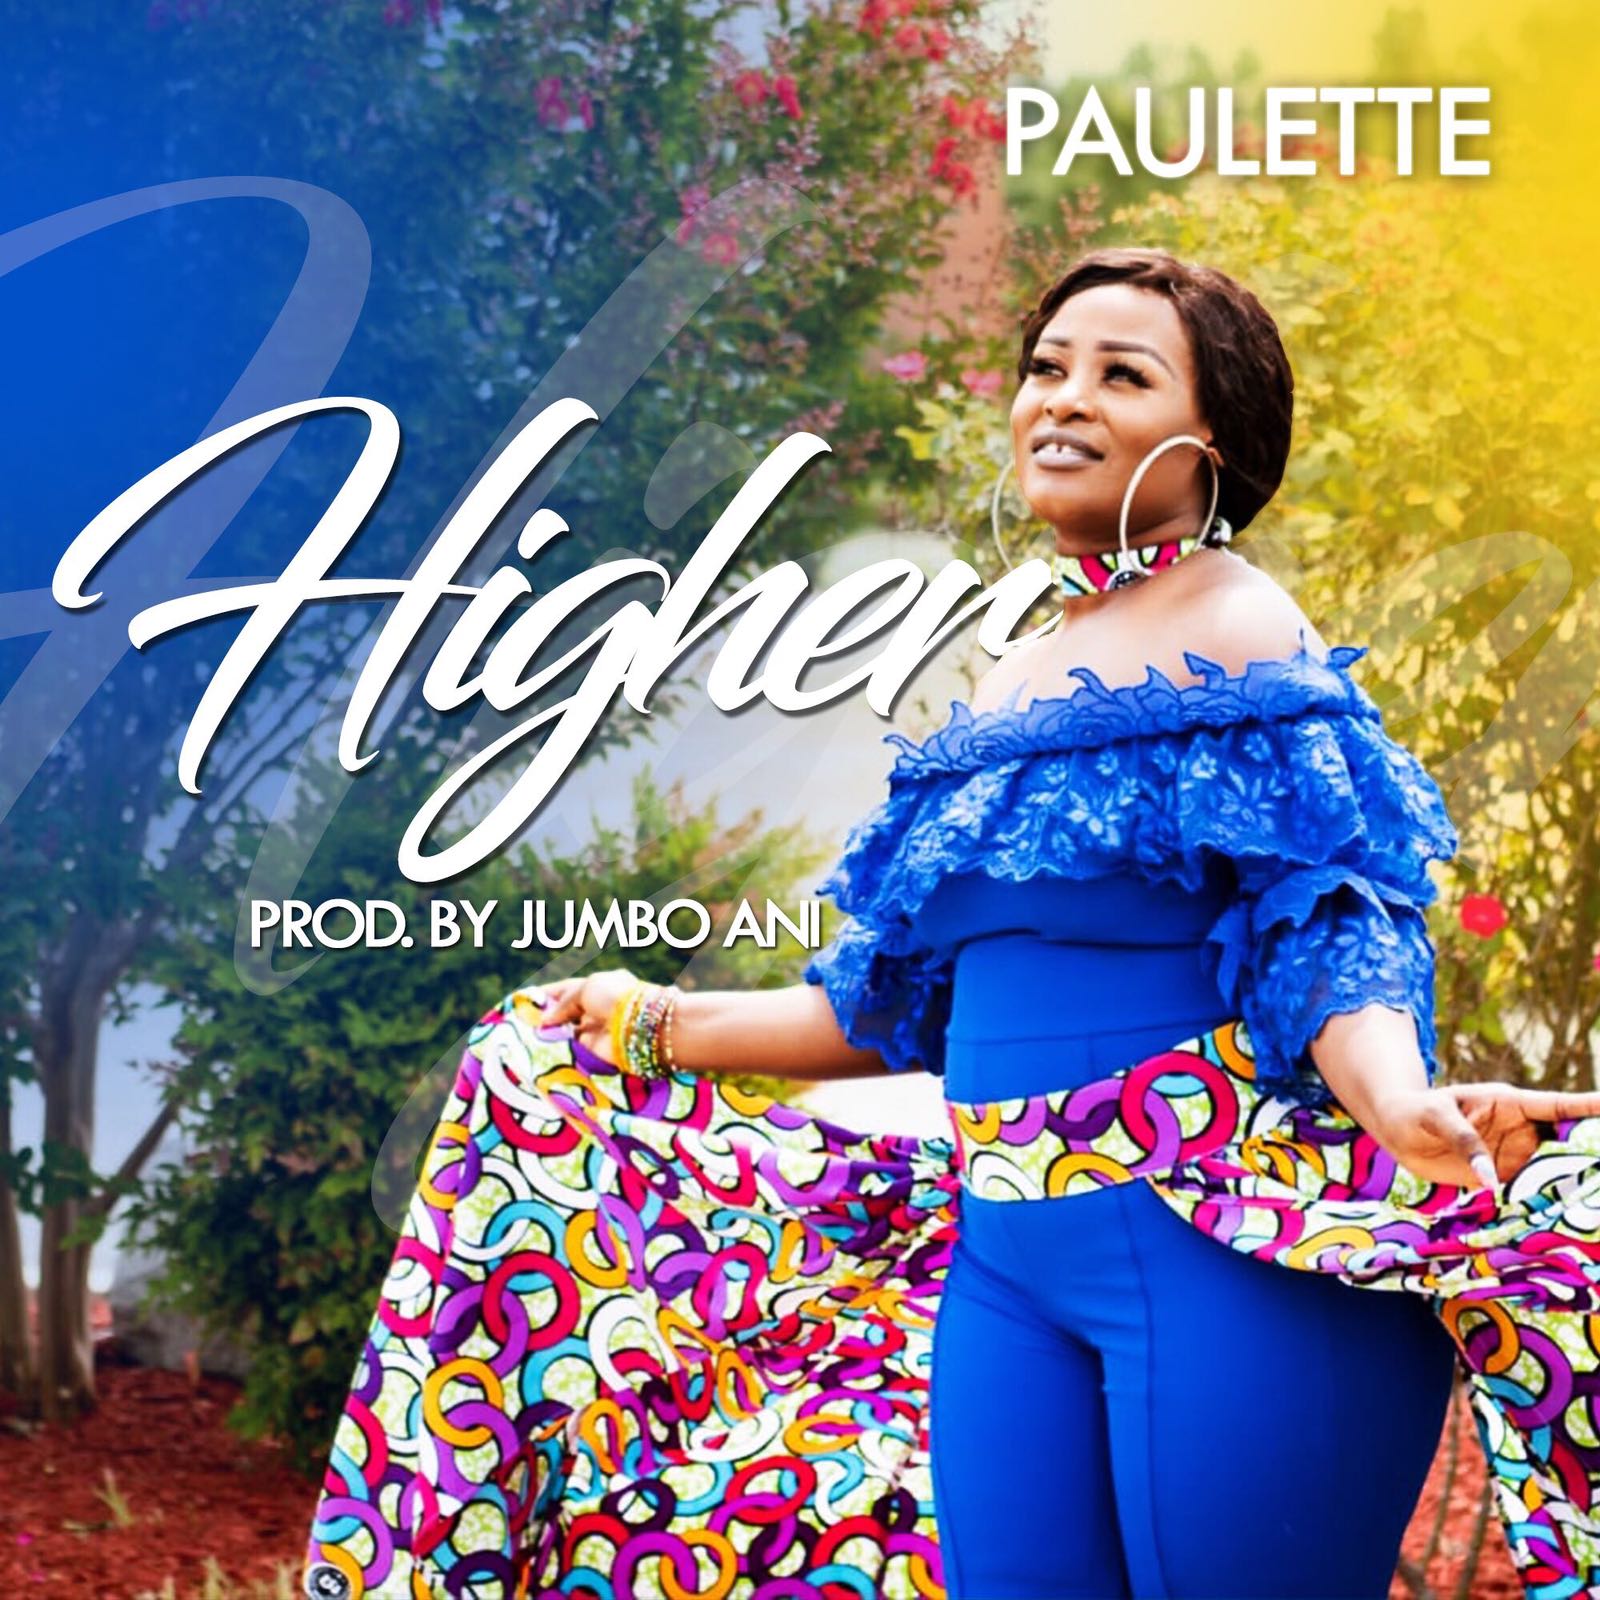 Higher By Paulette